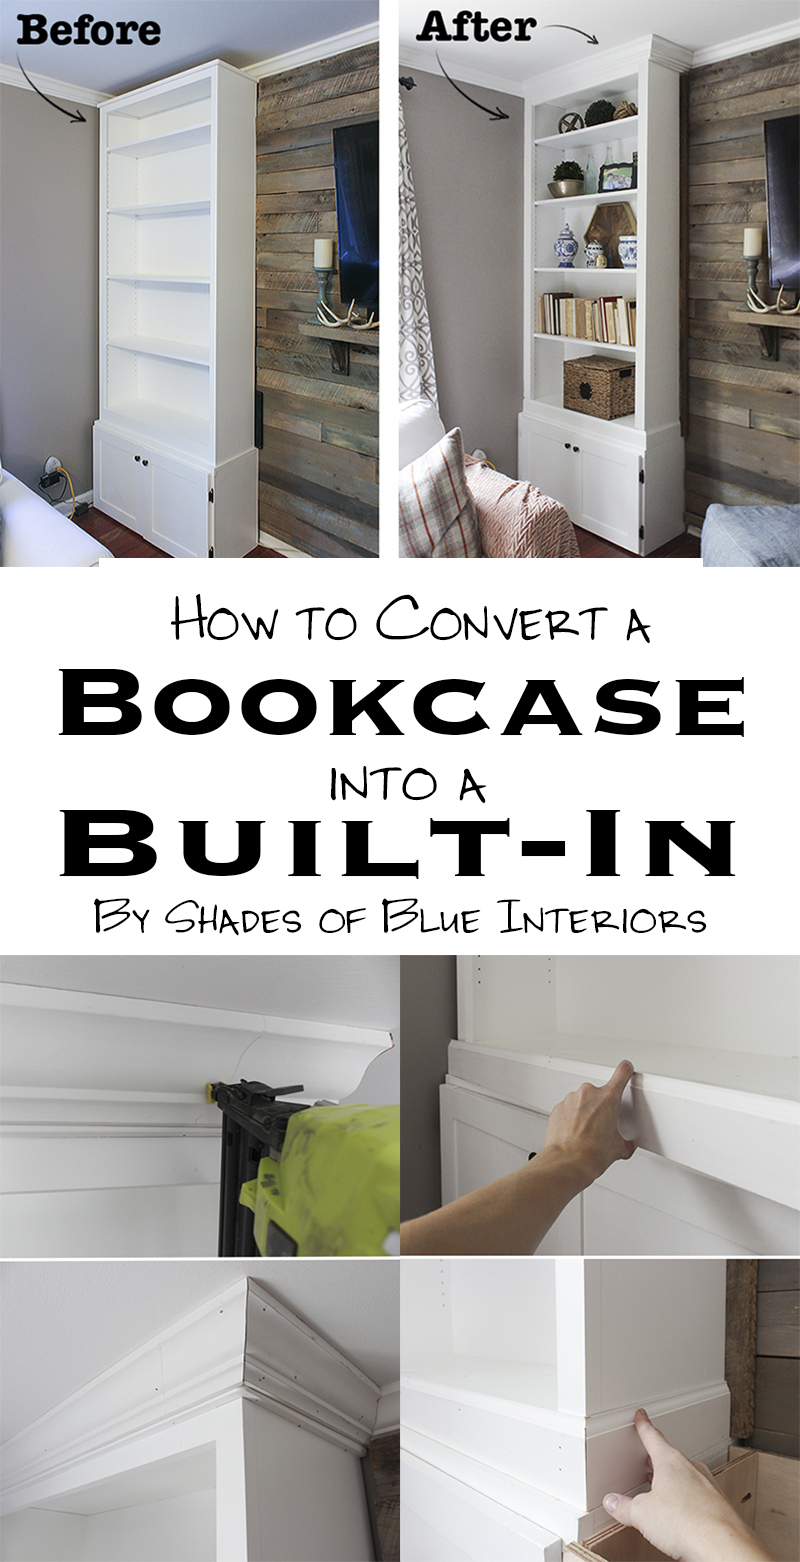 How to Convert Bookcases into Built-Ins